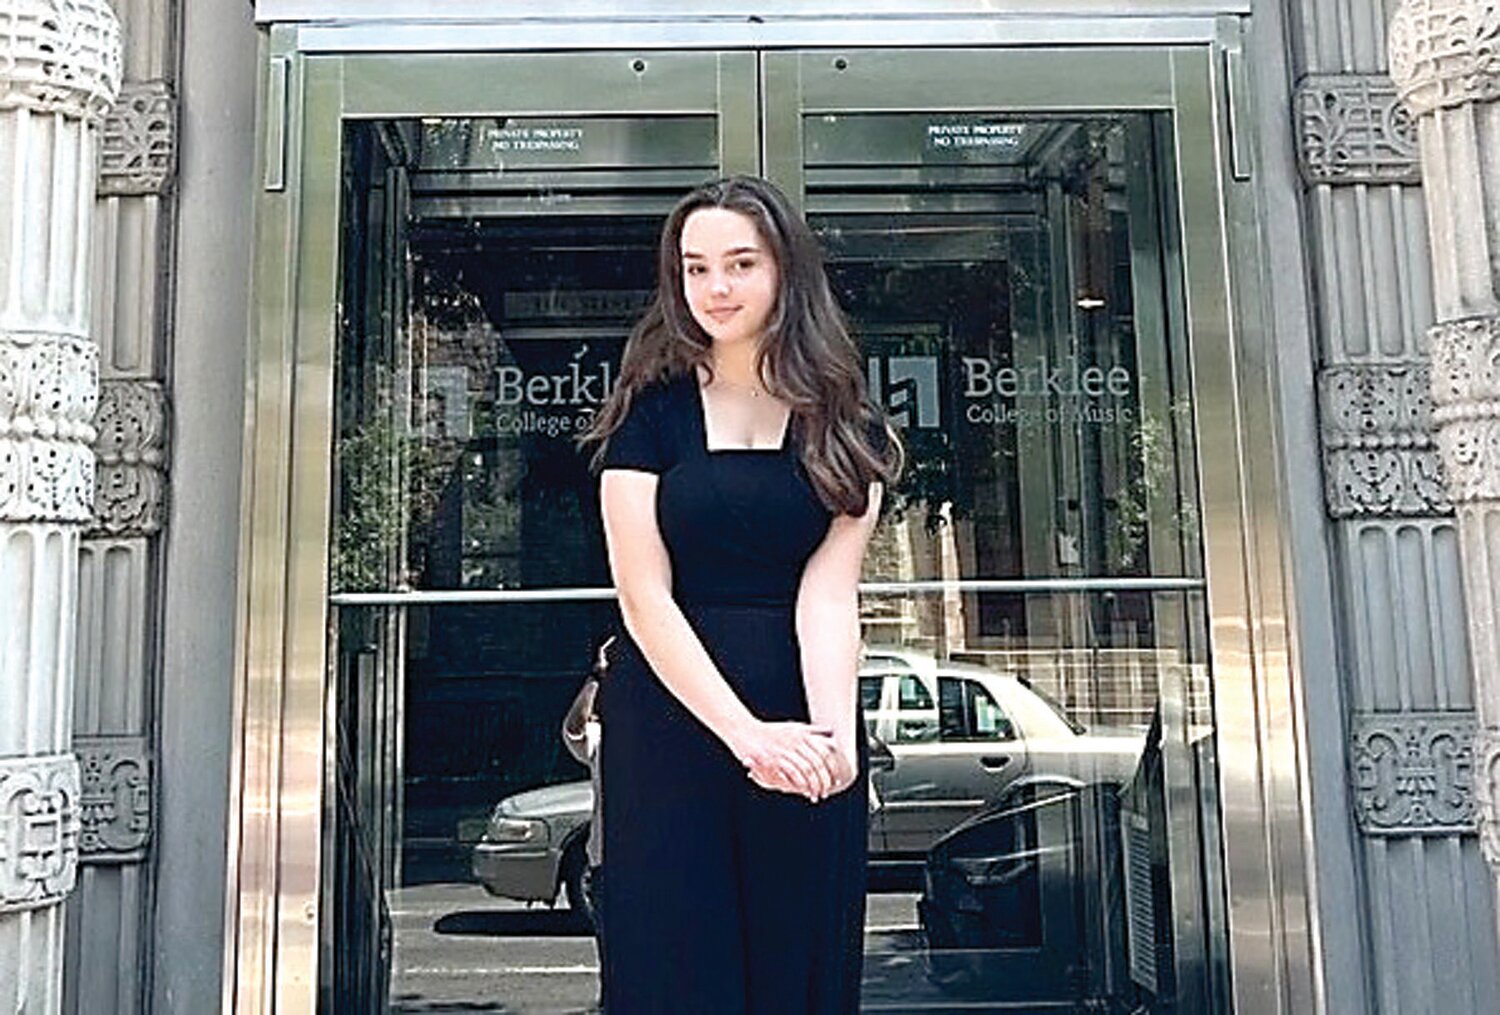 Rising Central Bucks South junior Olivia Giampolo spent part of her summer taking courses at the Boston Conservancy at Berklee.